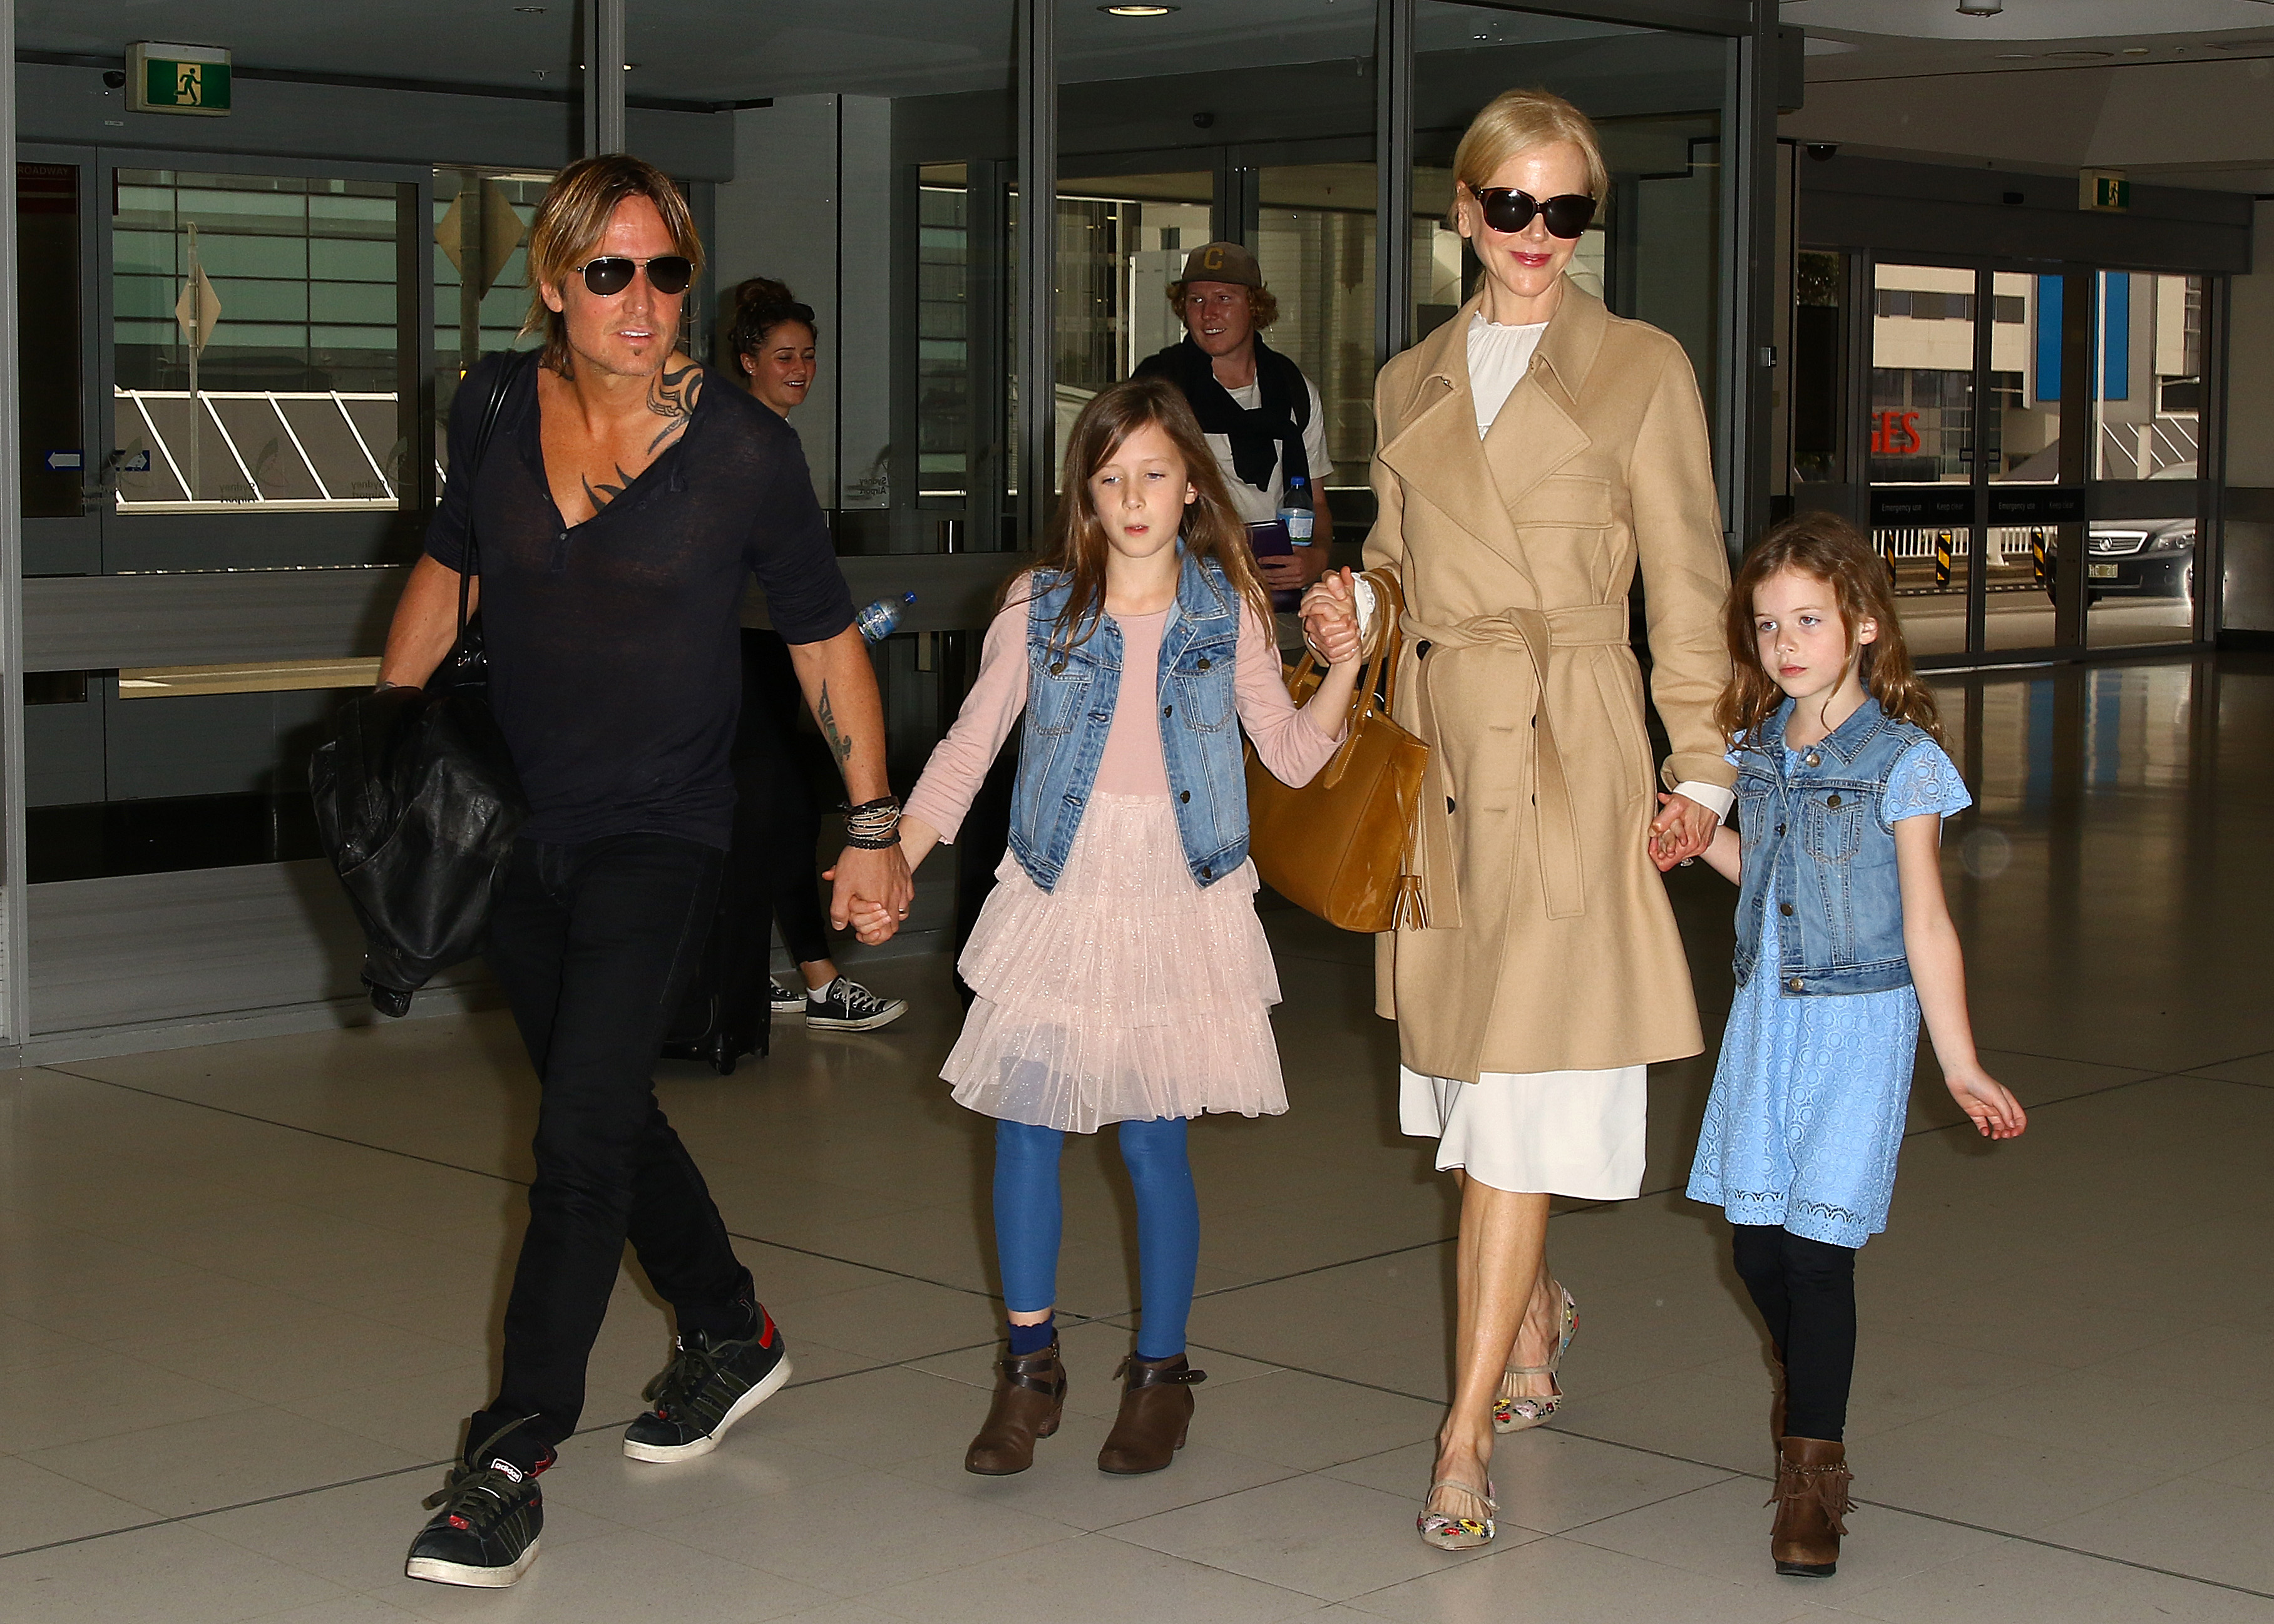 Nicole Kidman and Keith Urban arrive at Sydney airport with their daughters Faith Margaret and Sunday Rose on March 28, 2017, in Sydney, Australia. | Source: Getty Images